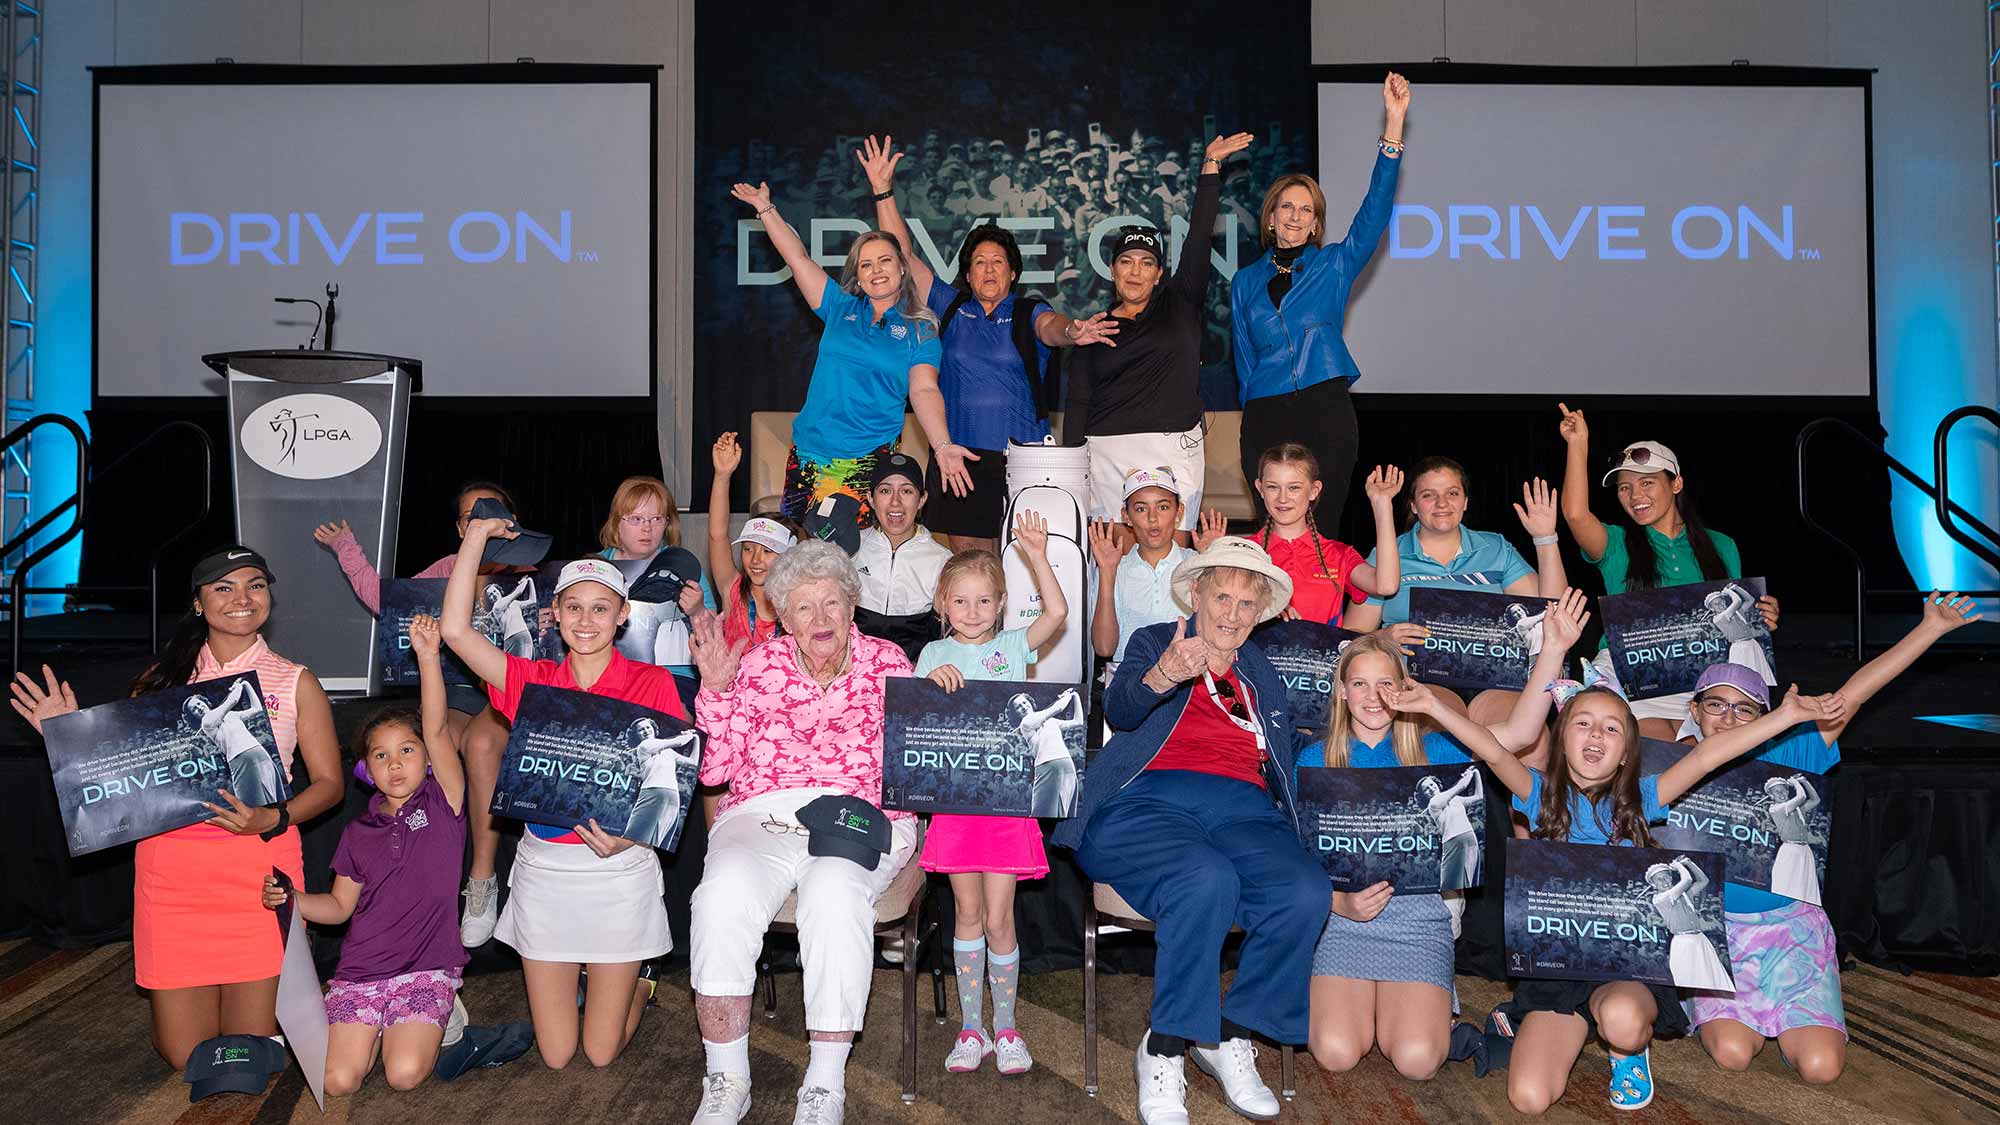 Stephanie Peareth, Nancy Lopez, Lizette Salas and Roberta Bowman and (bottom L-R) LPGA co-founders Marilynn Smith and Shirley Spork pose for a photo during the LPGA Announcement of new brand positioning encouraging girls to #DriveOn at JW Marriott Phoenix Desert Ridge on March 20, 2019 in Phoenix, Arizona